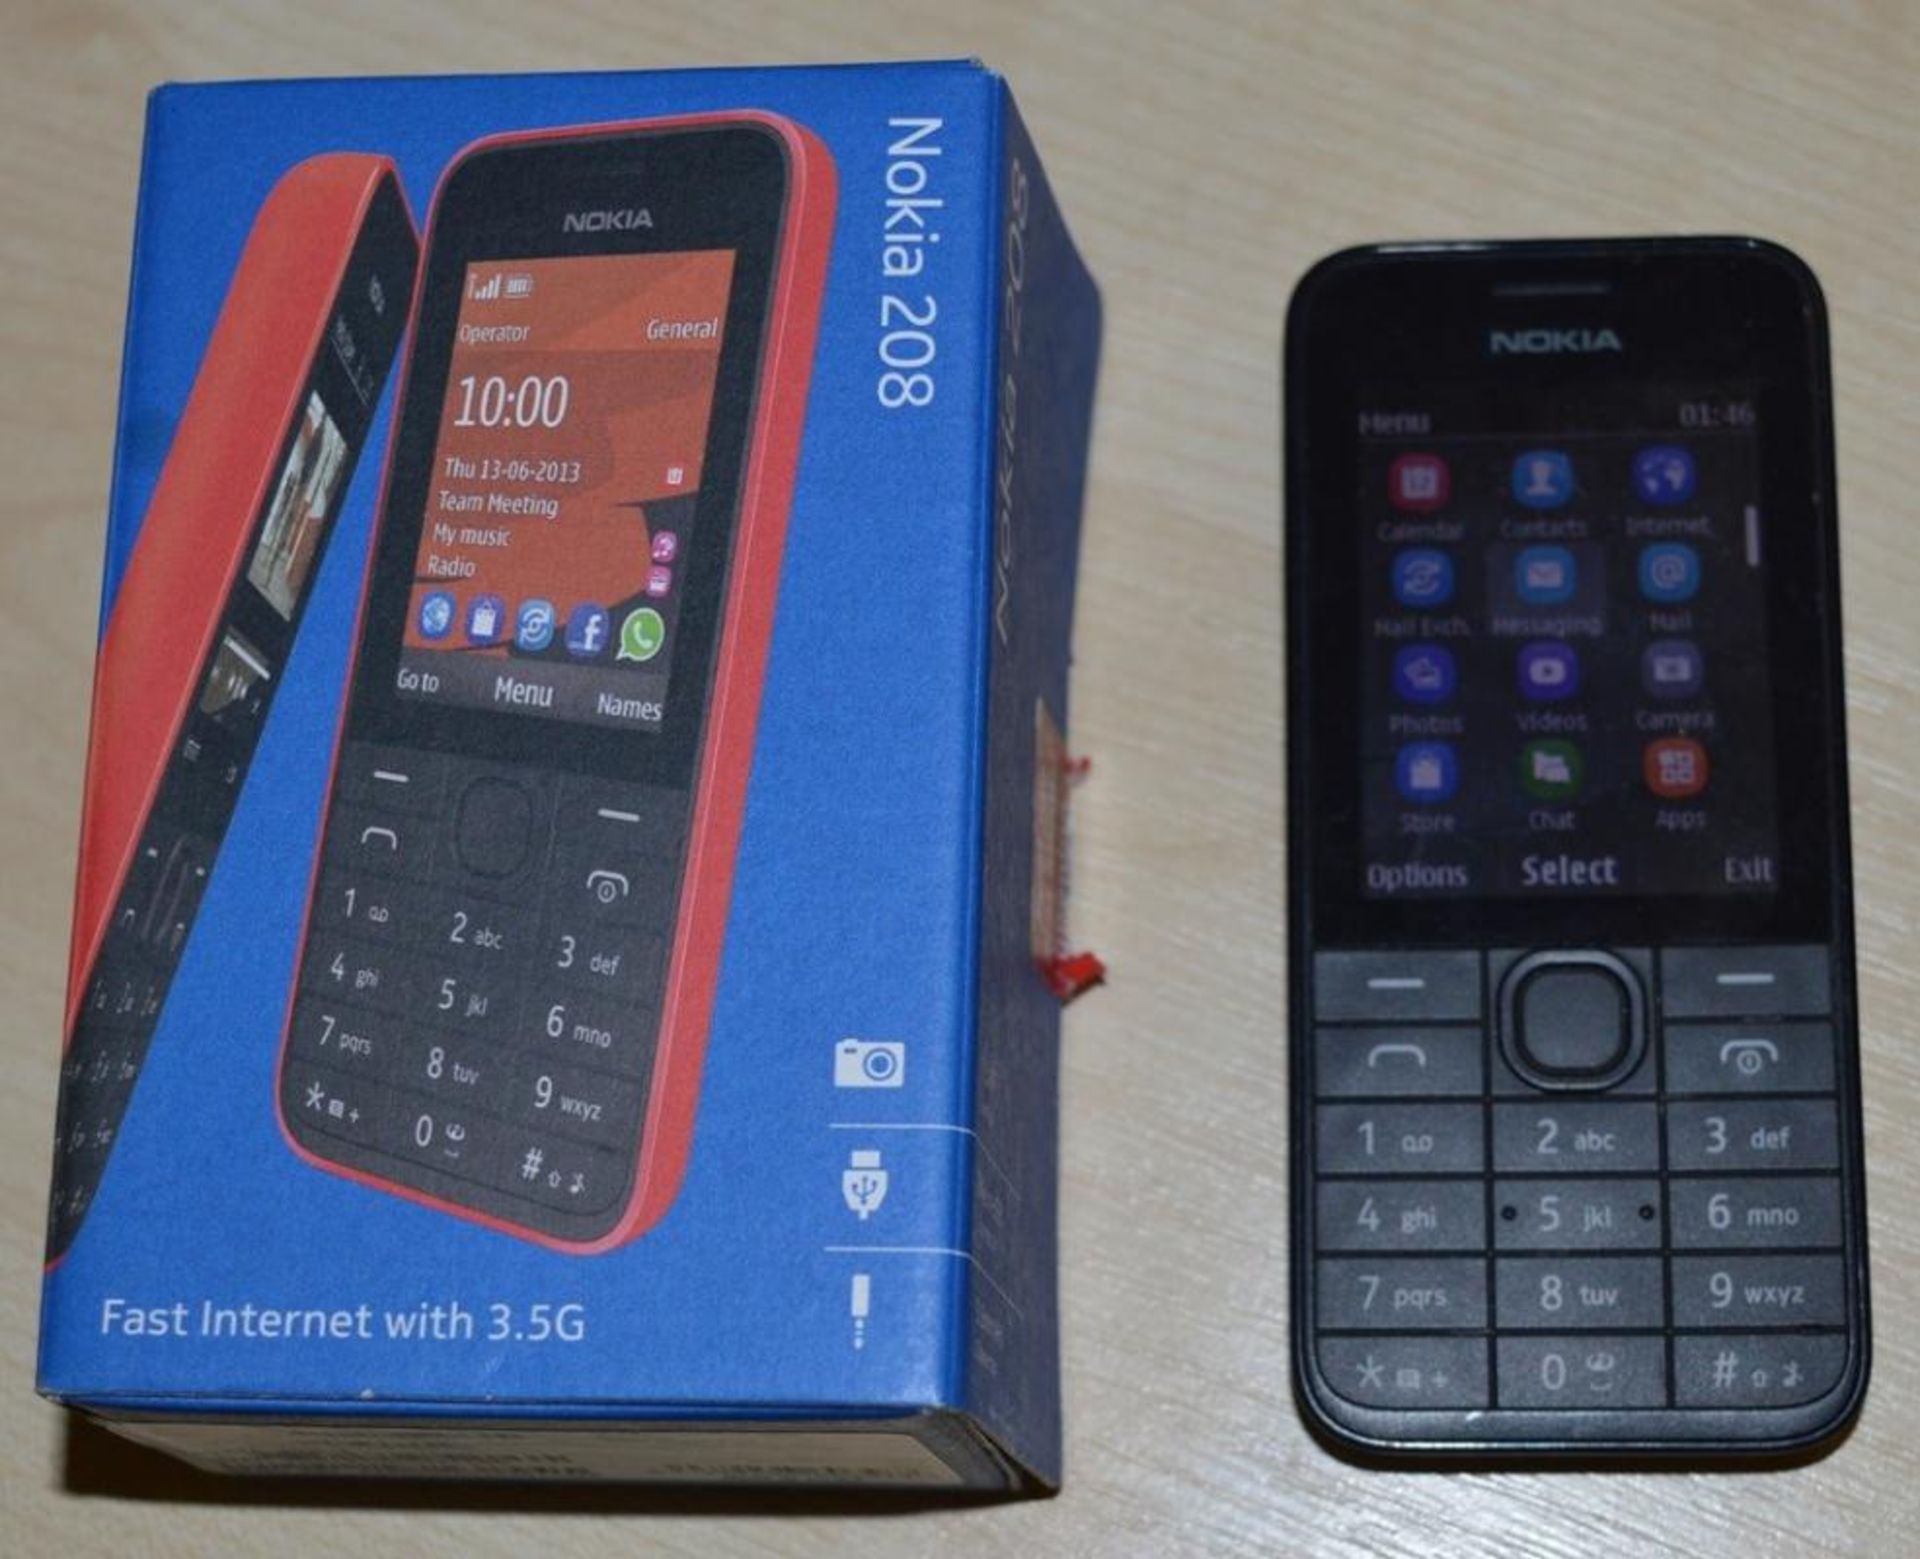 1 x Nokia 208.1 RM-948 Mobile Phone - MP3 Player - Video Playback 3.5G Internet - CL300 - Location: - Image 2 of 2